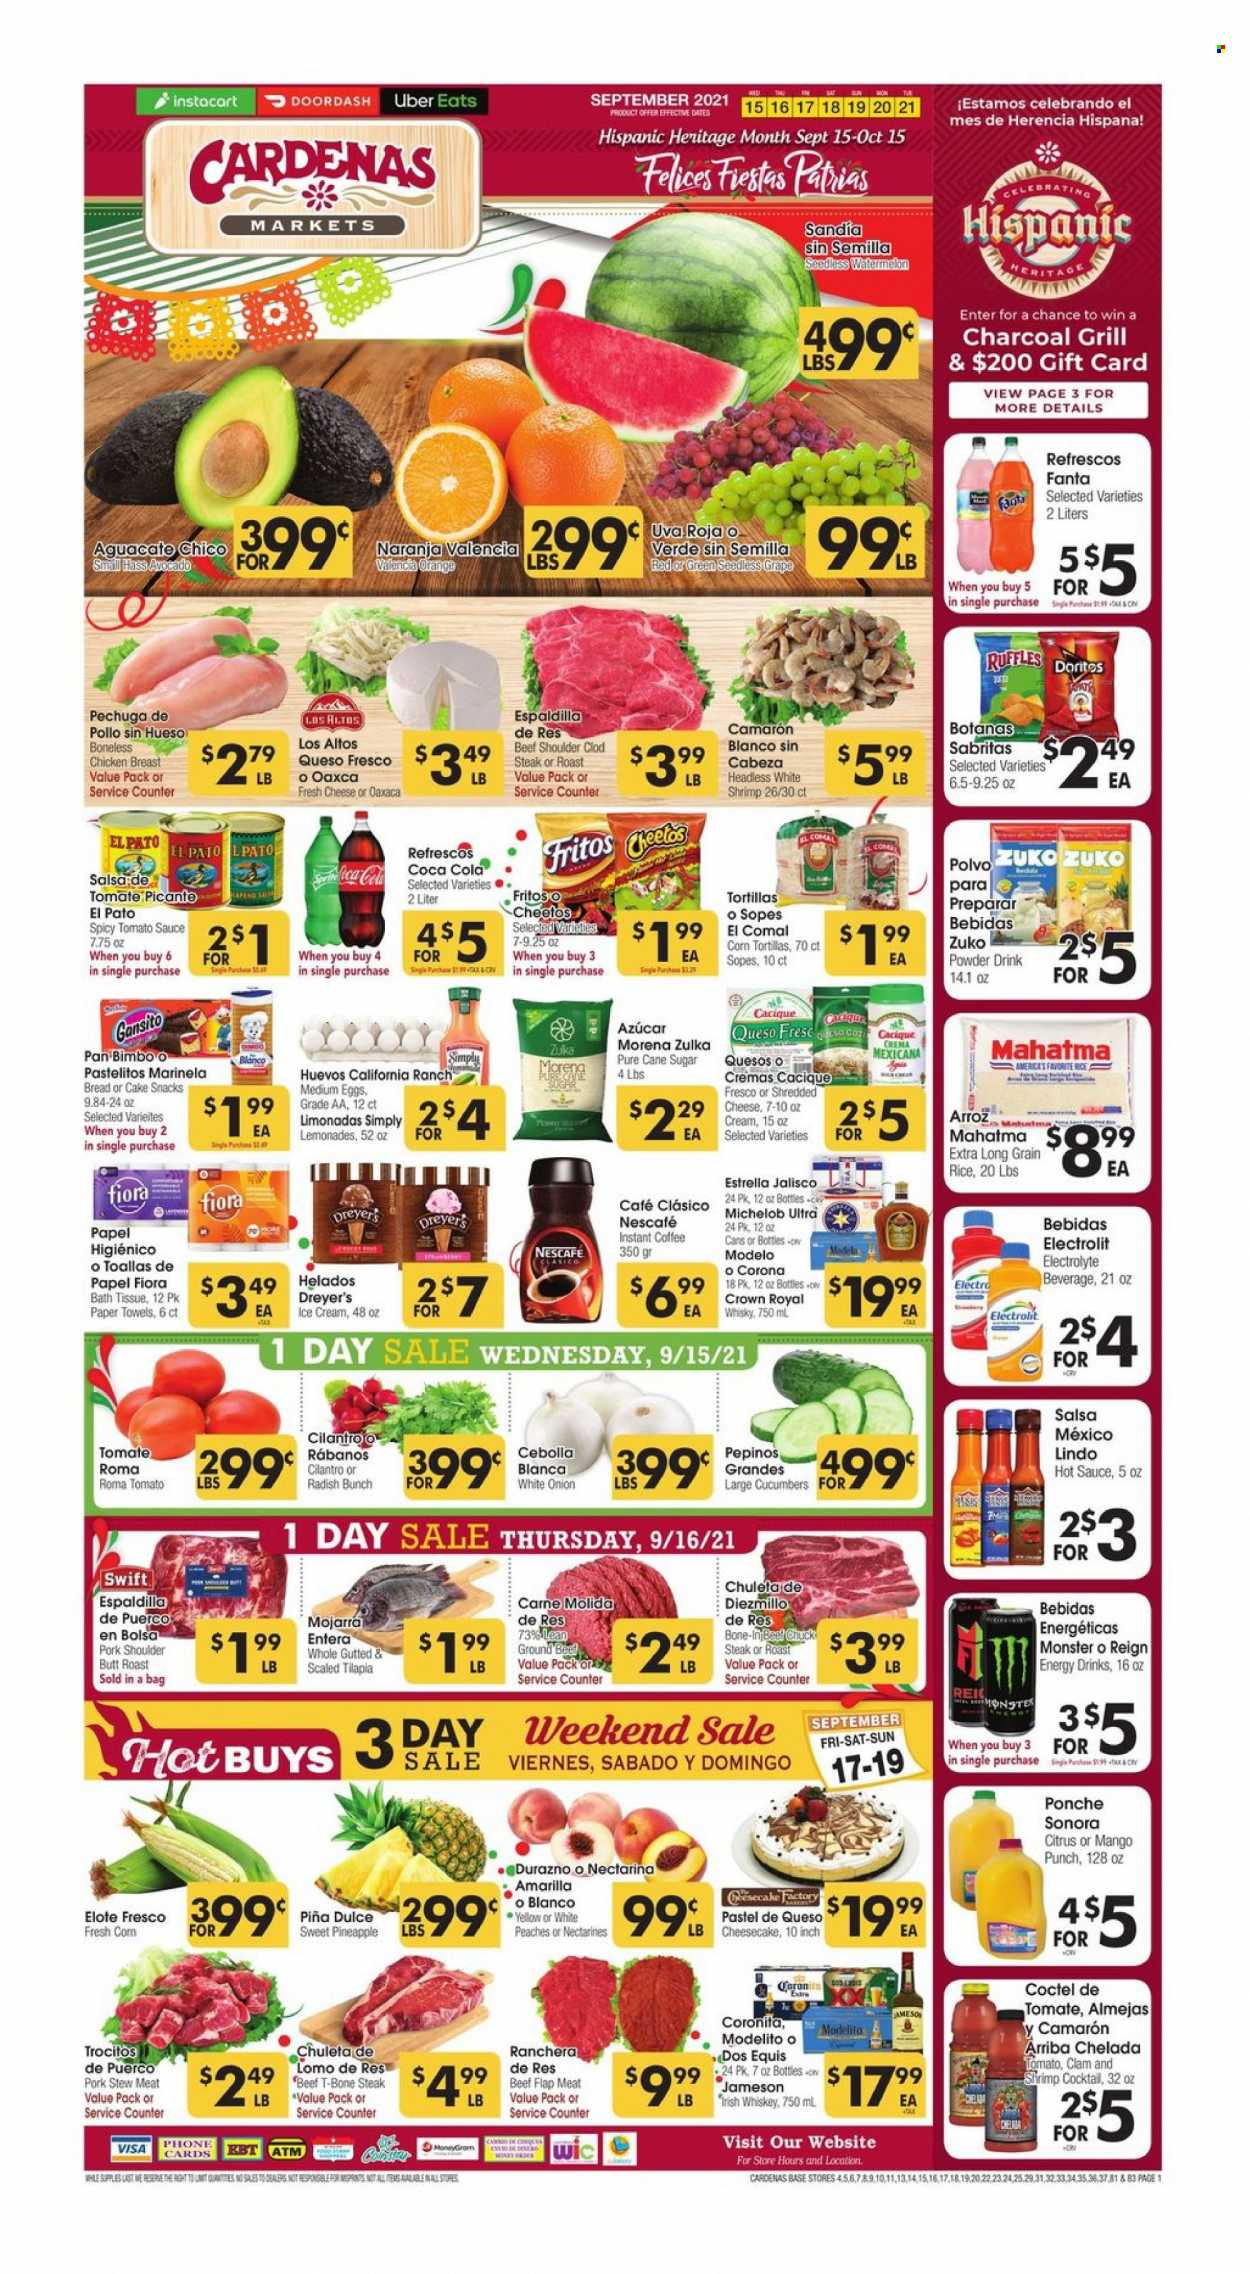 thumbnail - Cardenas Flyer - 09/15/2021 - 09/21/2021 - Sales products - stew meat, bread, tortillas, cake, corn, cucumber, radishes, tomatoes, avocado, pineapple, oranges, clams, tilapia, shrimps, queso fresco, eggs, ice cream, snack, Doritos, Fritos, Cheetos, Ruffles, cane sugar, sugar, tomato sauce, long grain rice, cilantro, hot sauce, salsa, Coca-Cola, Fanta, energy drink, Monster, powder drink, instant coffee, Nescafé, whiskey, Jameson, punch, whisky, beer, Corona Extra, Modelo, chicken breasts, beef meat, t-bone steak, steak, pork meat, pork shoulder, bath tissue, kitchen towels, paper towels, pan, nectarines, Dos Equis, Michelob, peaches. Page 1.